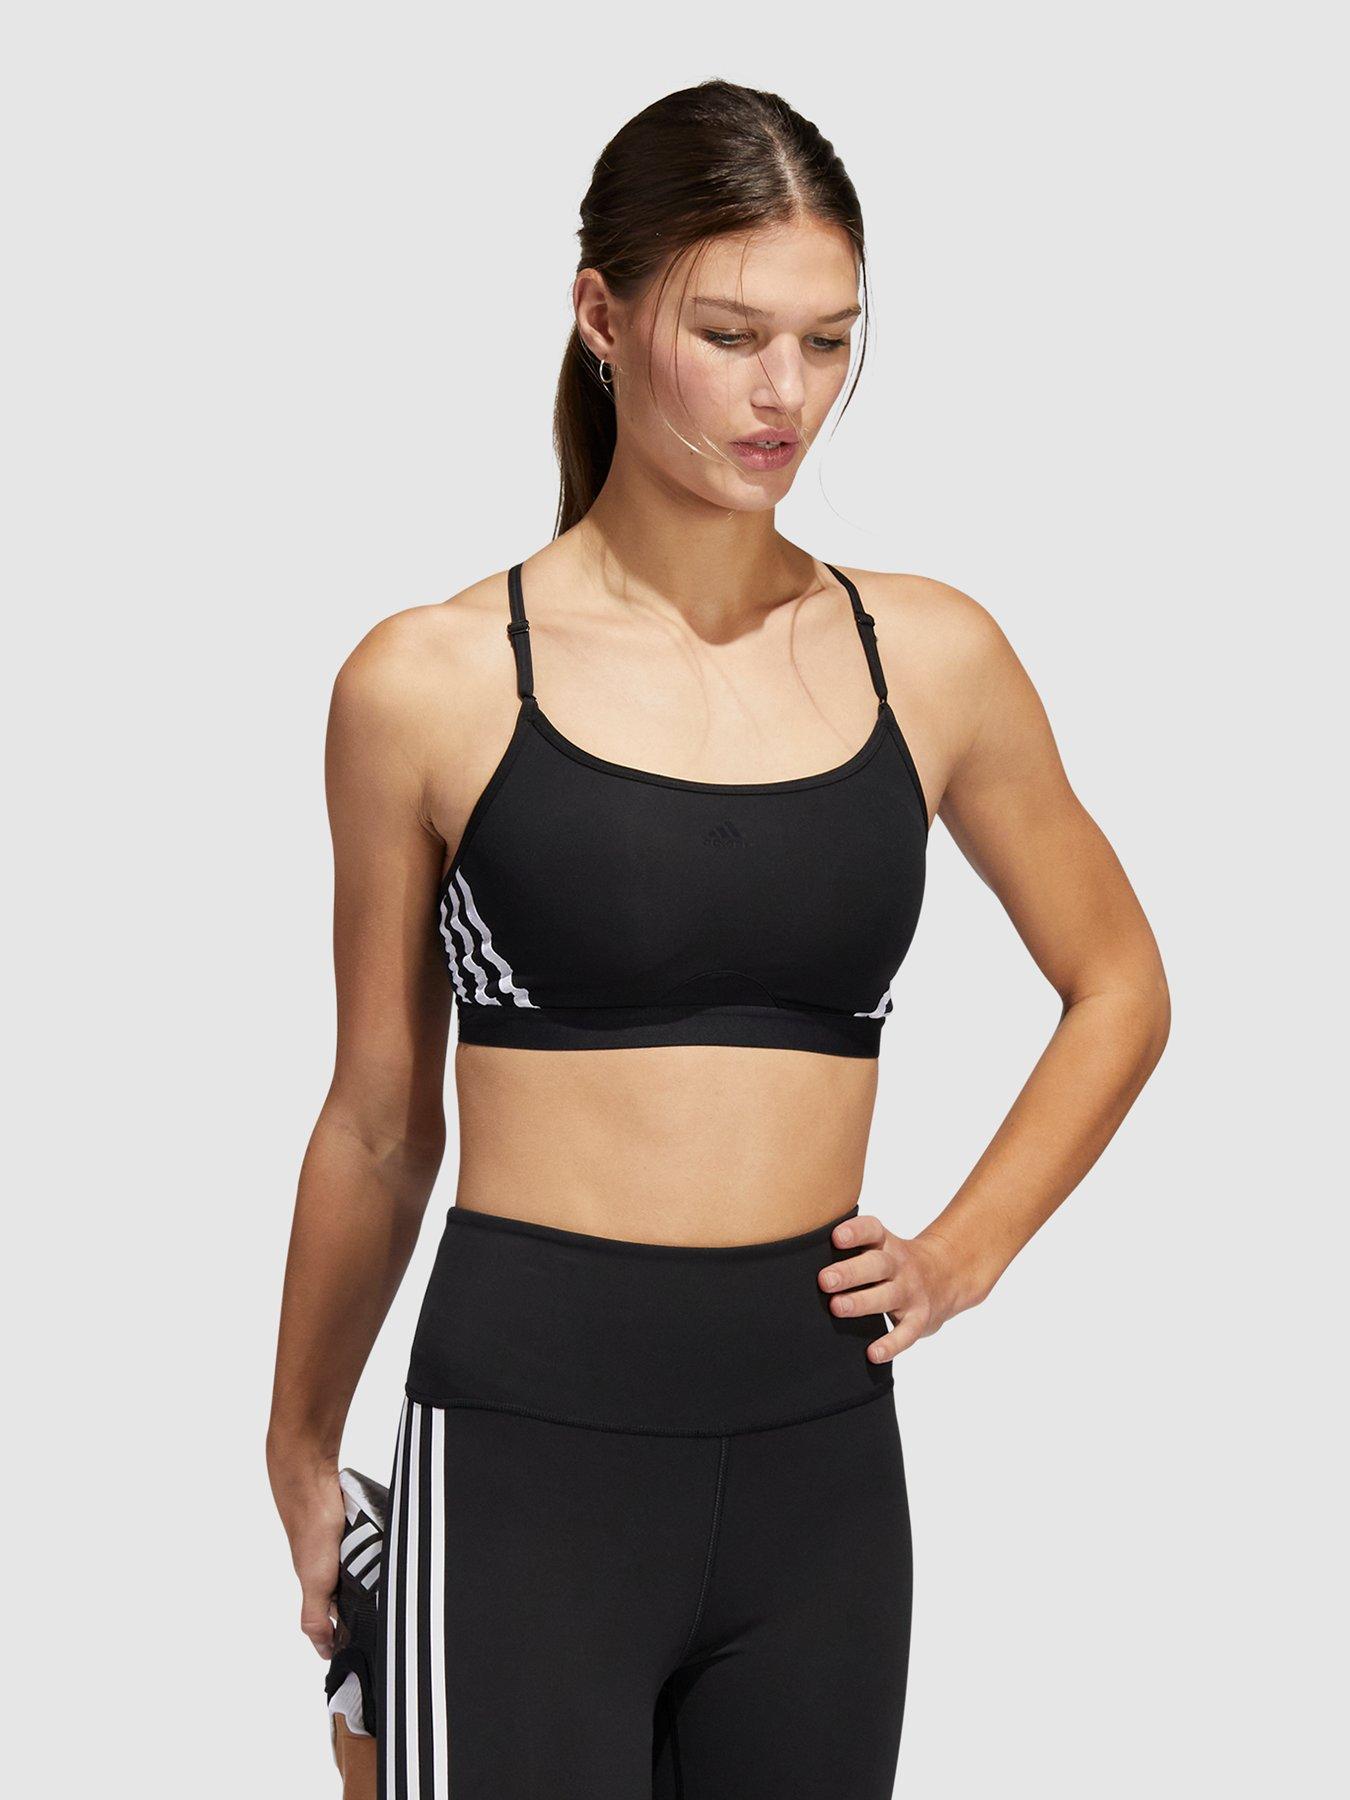 adidas Yoga Essentials low support sports bra in green, ASOS